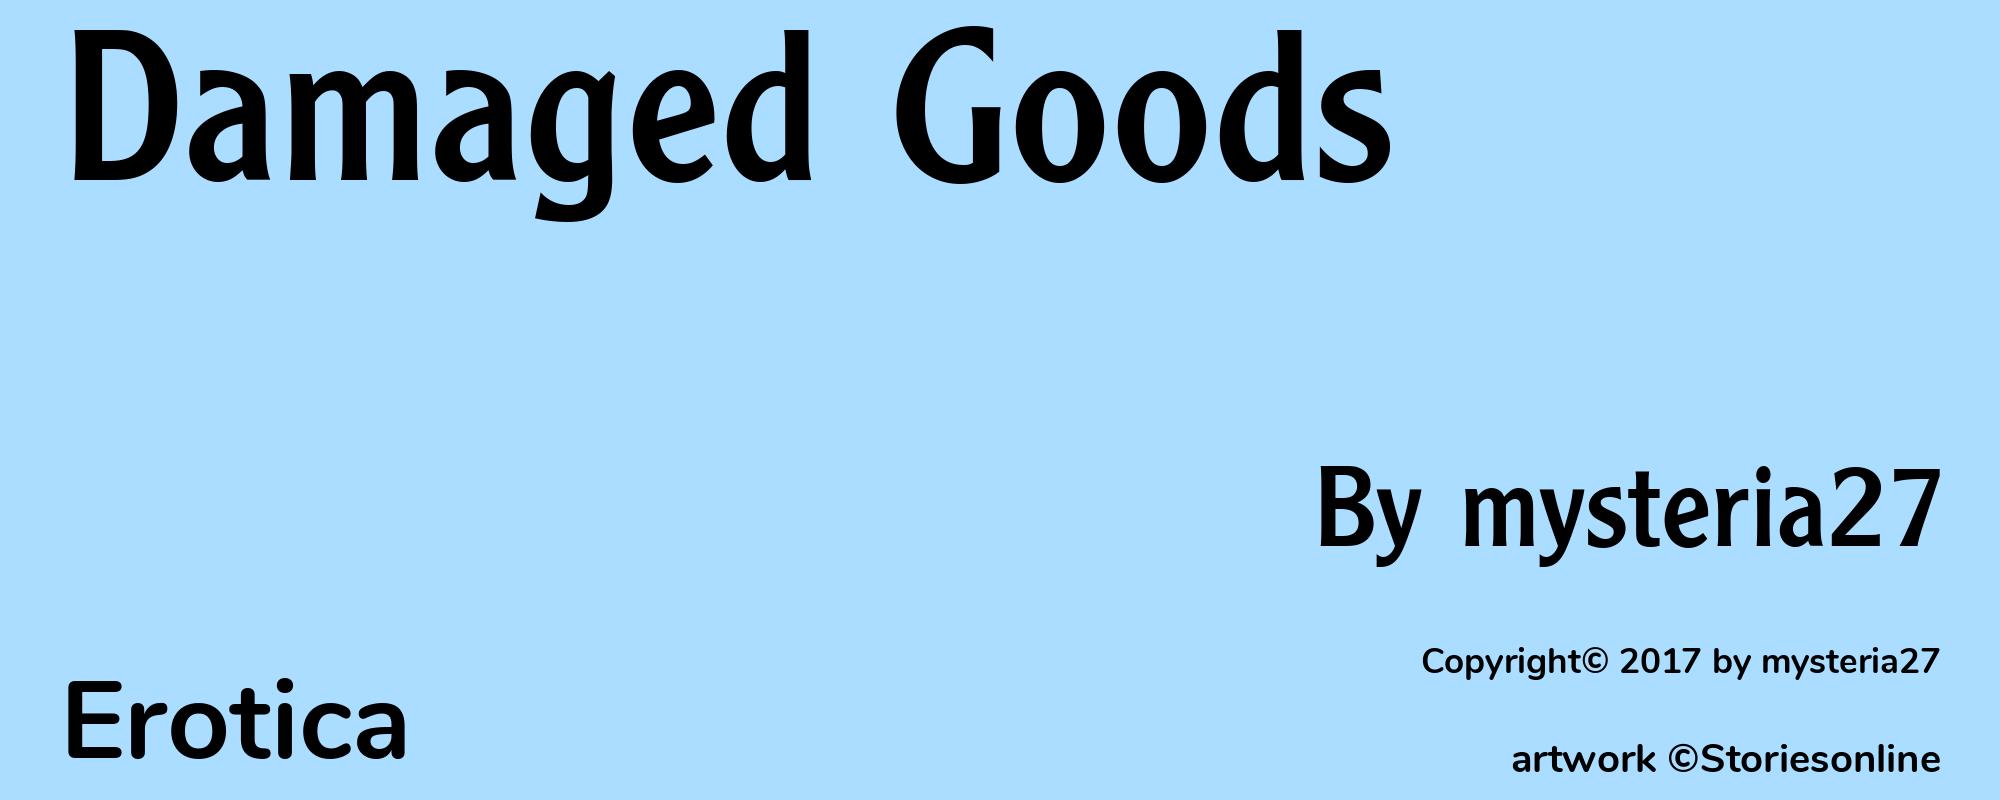 Damaged Goods - Cover